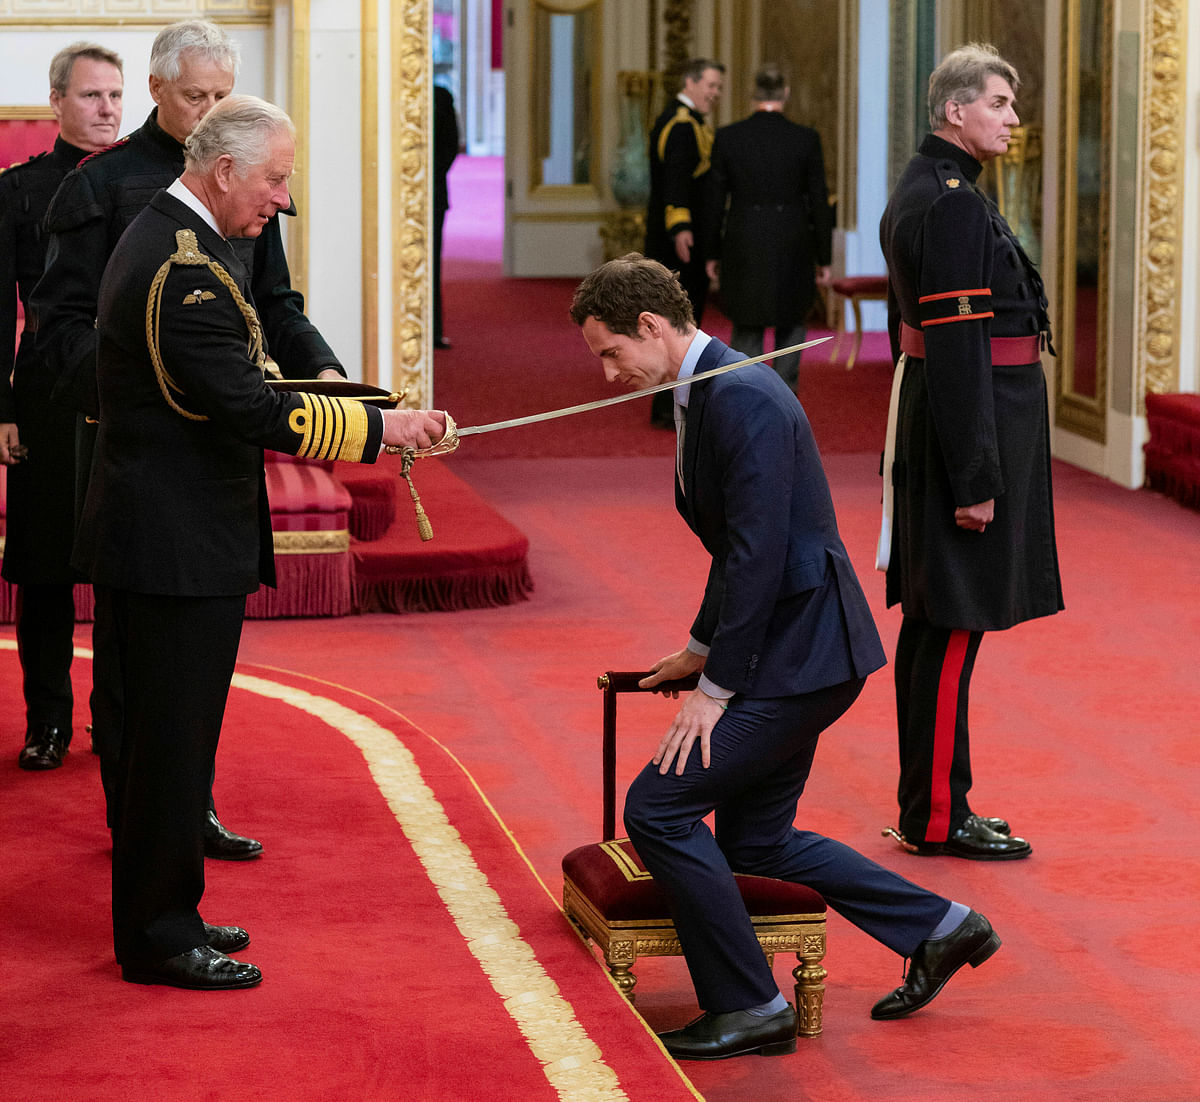 Andy Murray received his knighthood from Prince Charles on Thursday.